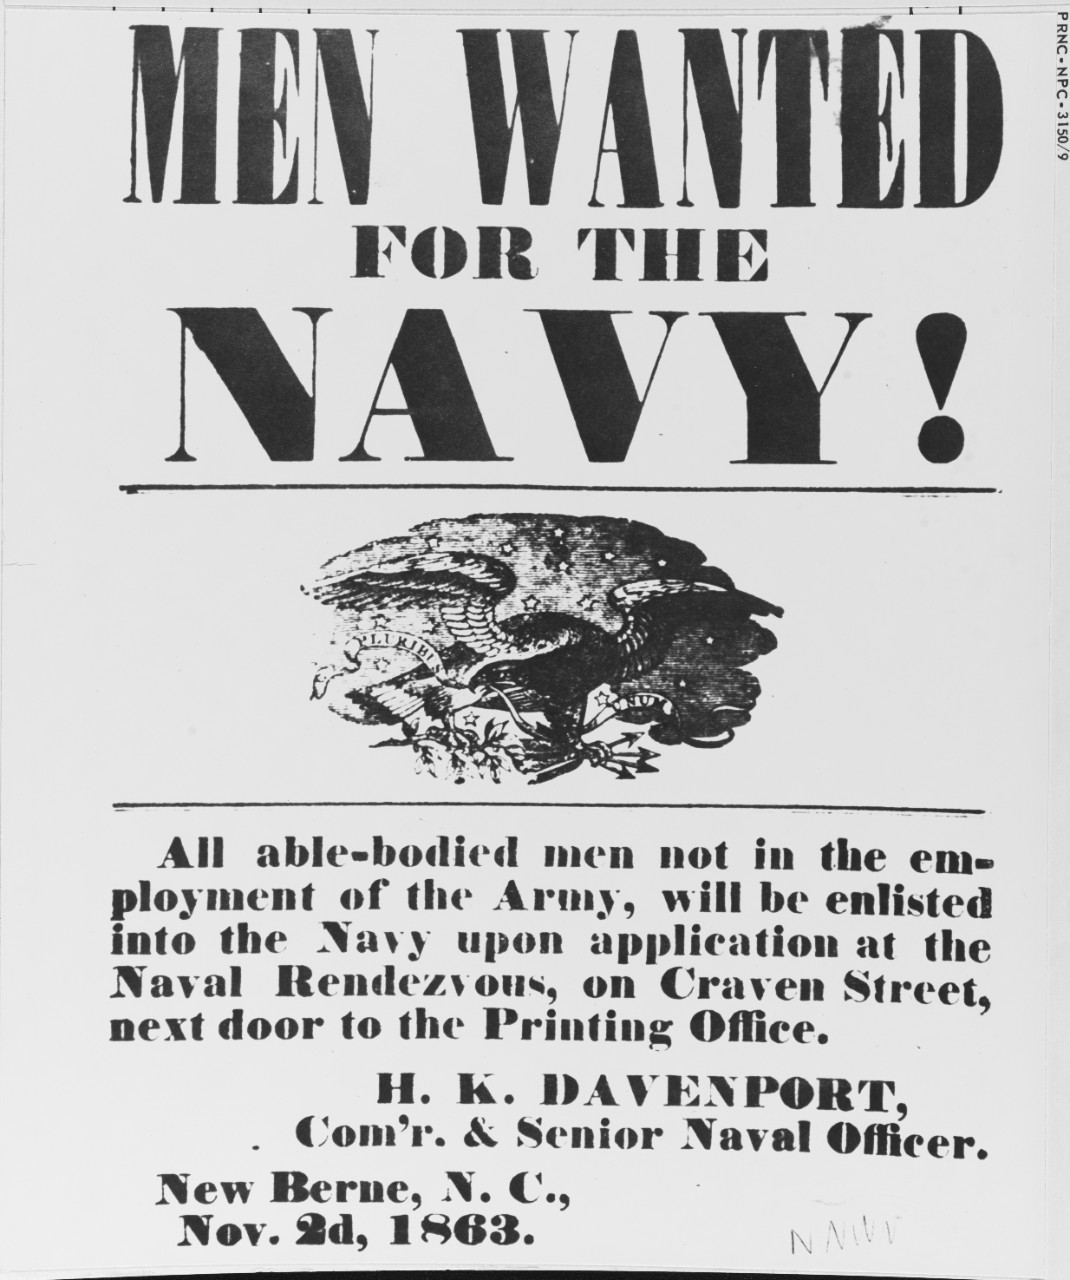 during the civil war, the union navy brainly